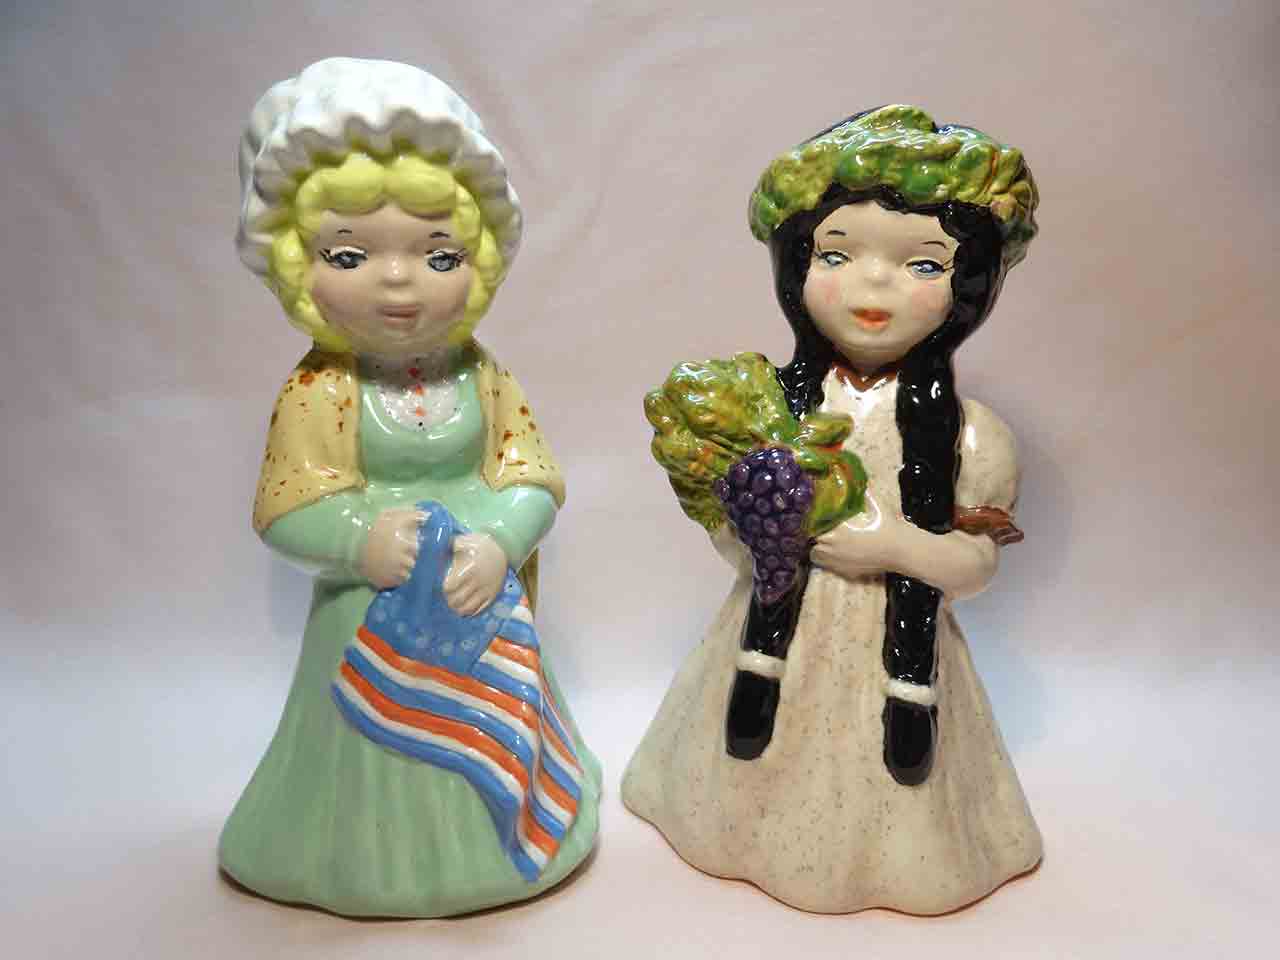 Girls of the month by Jean Grief - salt and pepper shakers